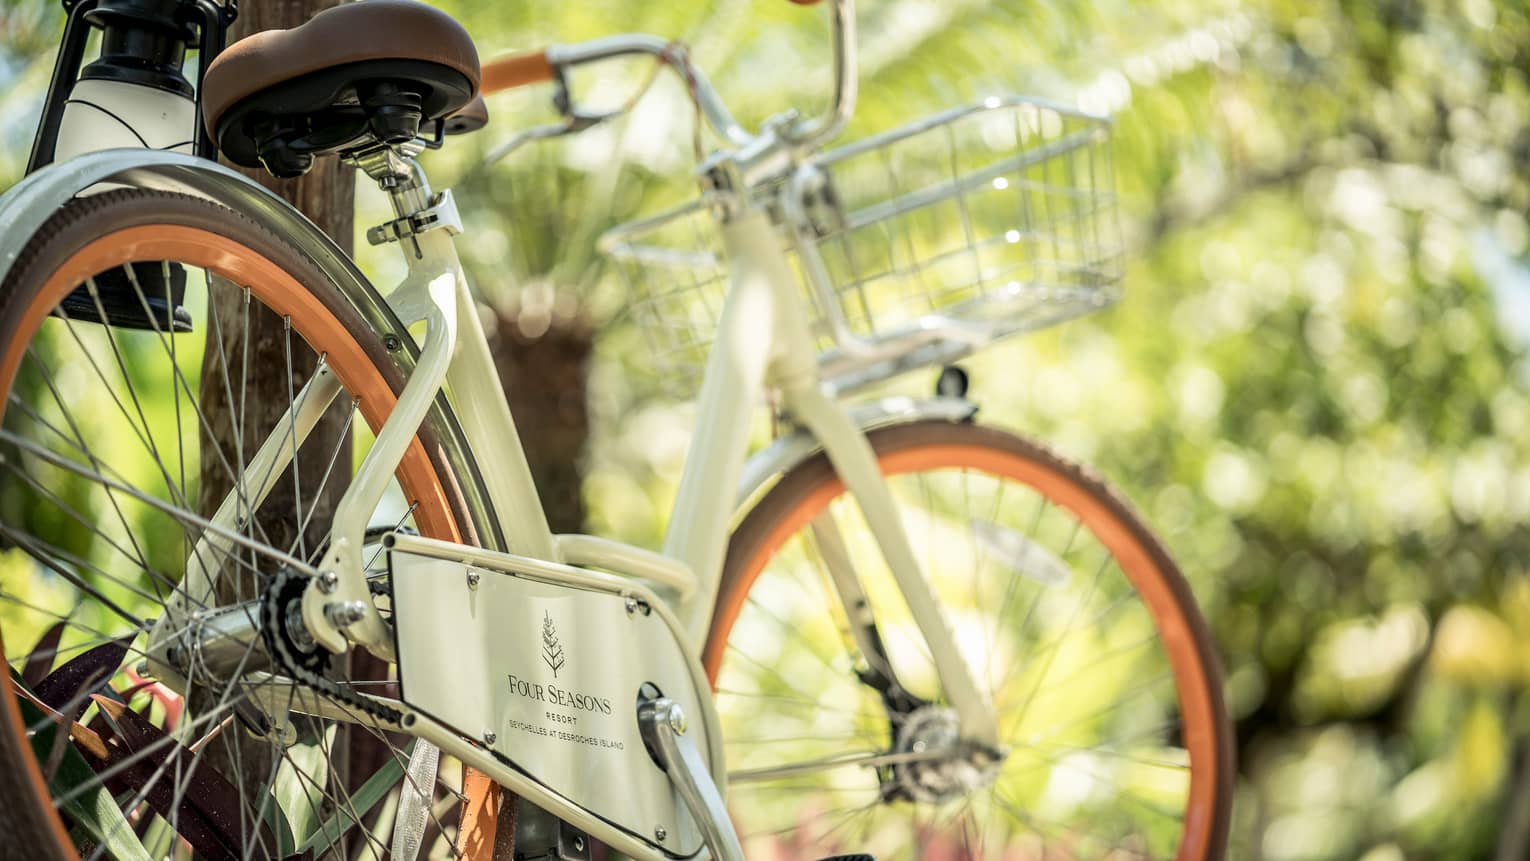 White vintage style bicycle with Four Seasons Hotels logo